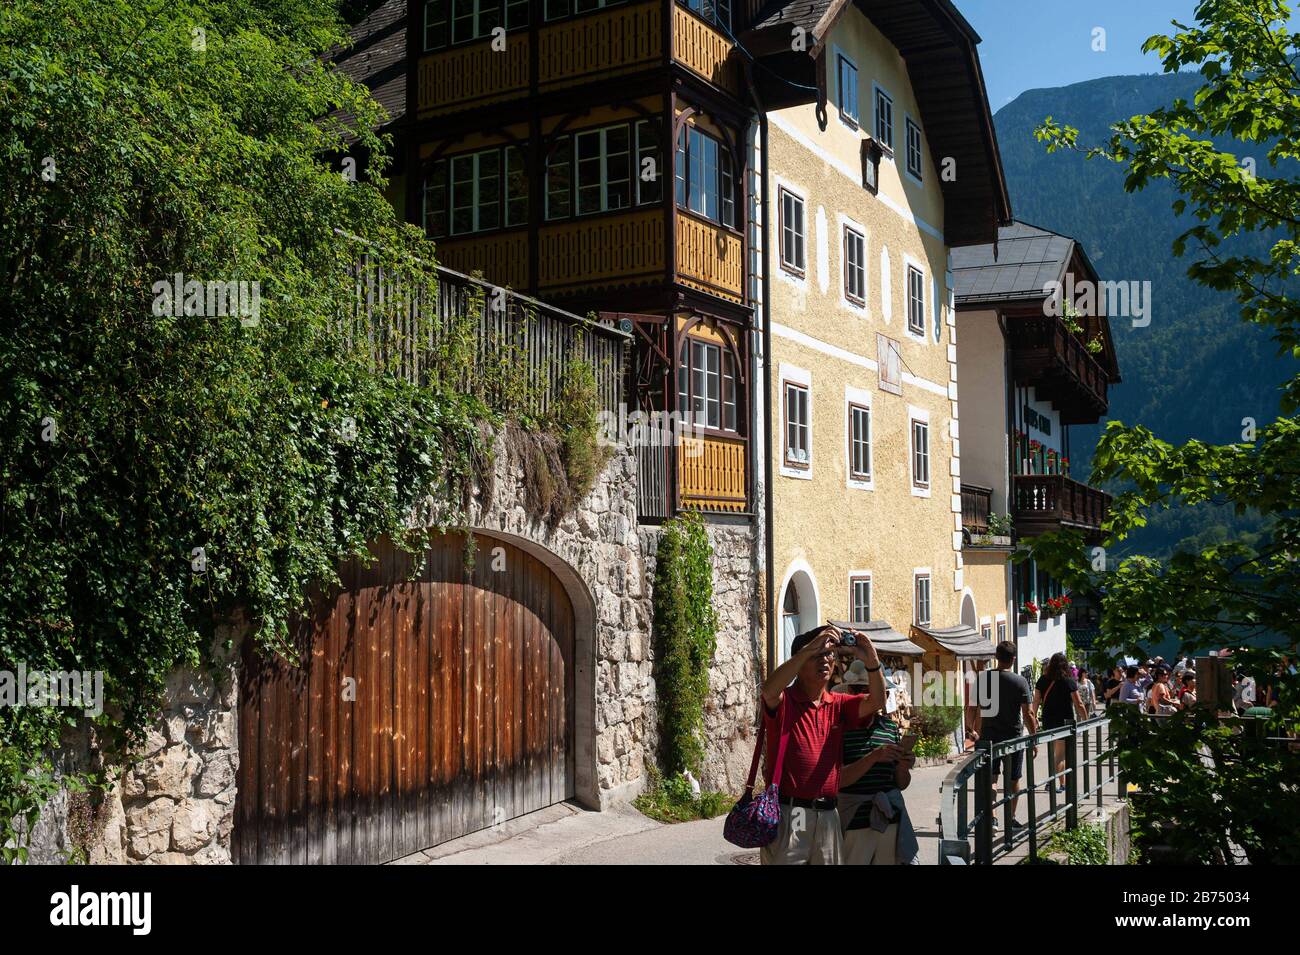 18.06.2019, Hallstatt, Upper Austria, Austria, Europe - Tourists stroll through the small village, a favourite destination of Chinese people, which exists as a replica in the Chinese province of Guangdong. [automated translation] Stock Photo